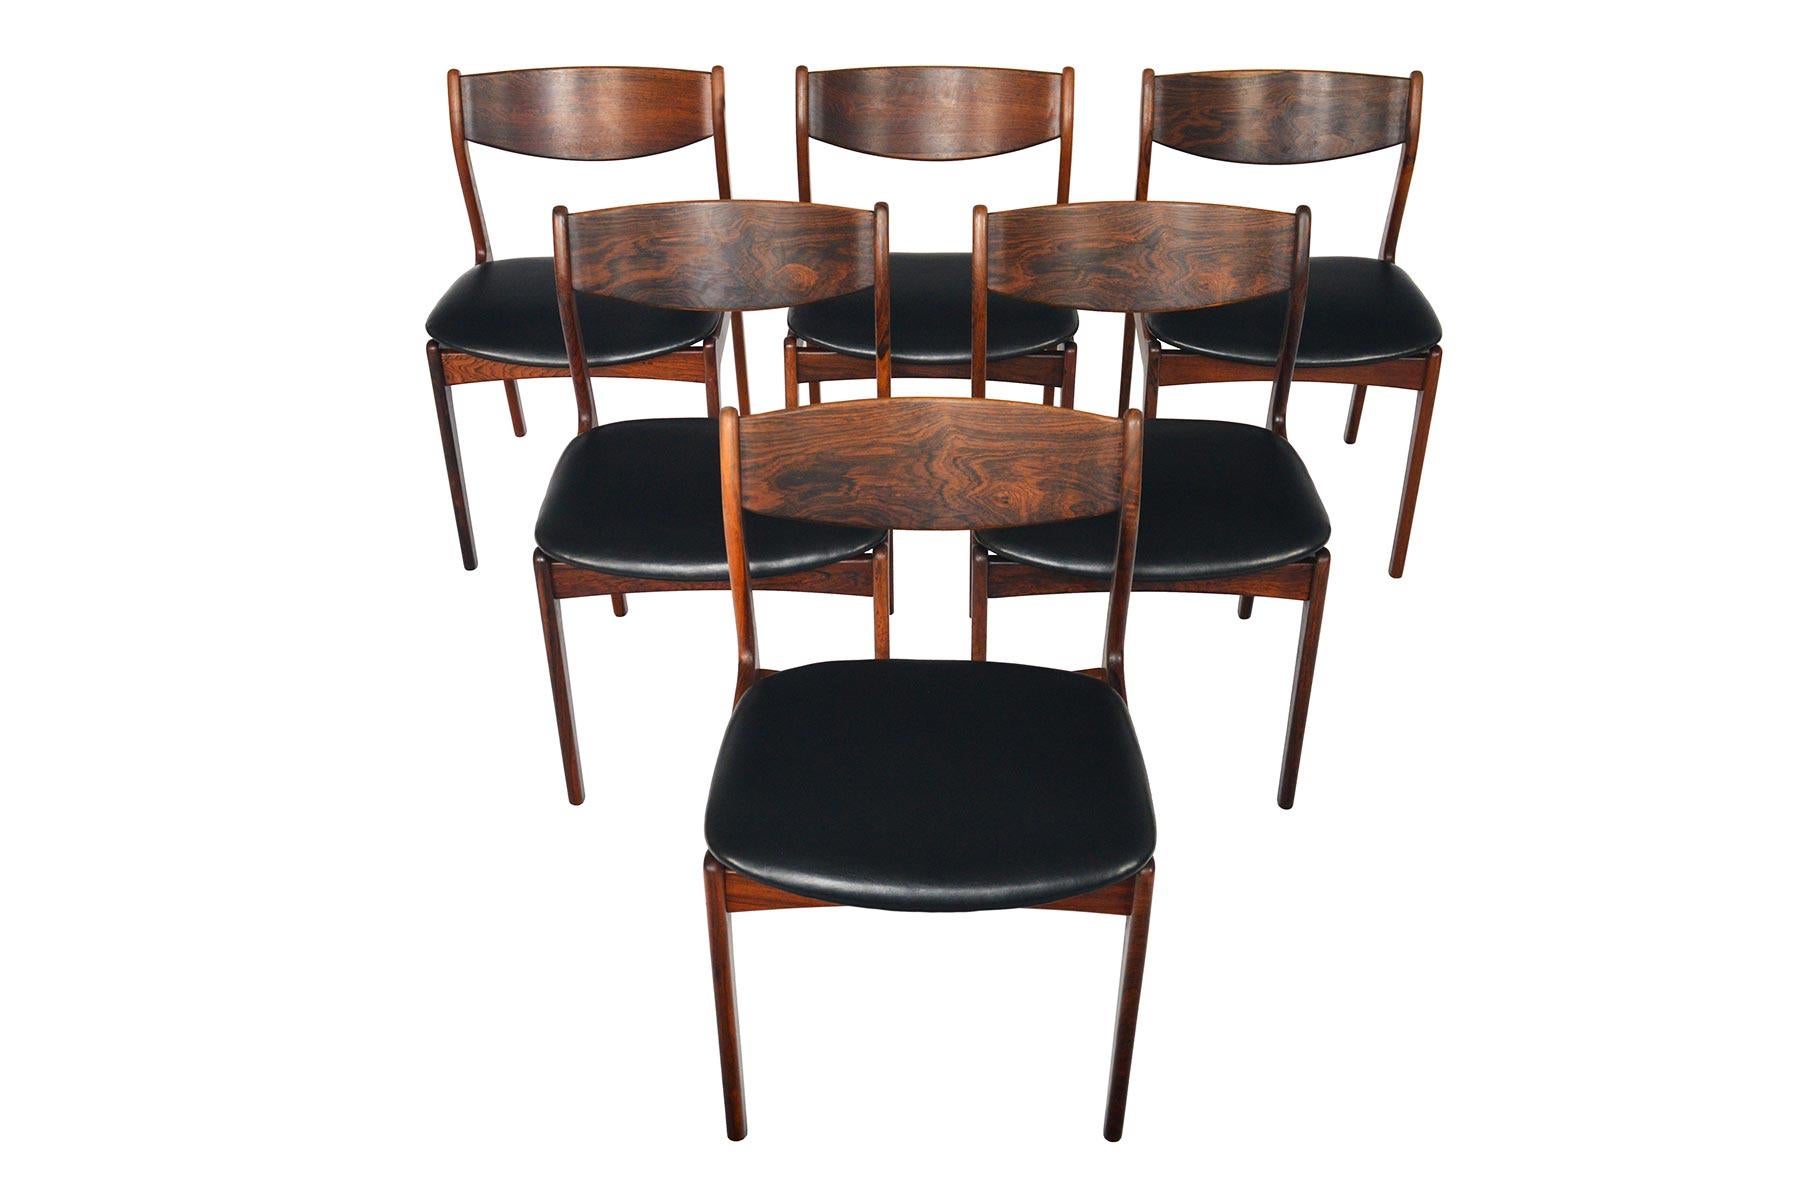 This set of six Danish modern midcentury dining chairs by P.E. Jørgensen for Farso Stolefabrik offer a Classic Scandinavian silhouette with a stately curved backrest. Crafted in Brazilian rosewood, this set provides comfortable seating for both